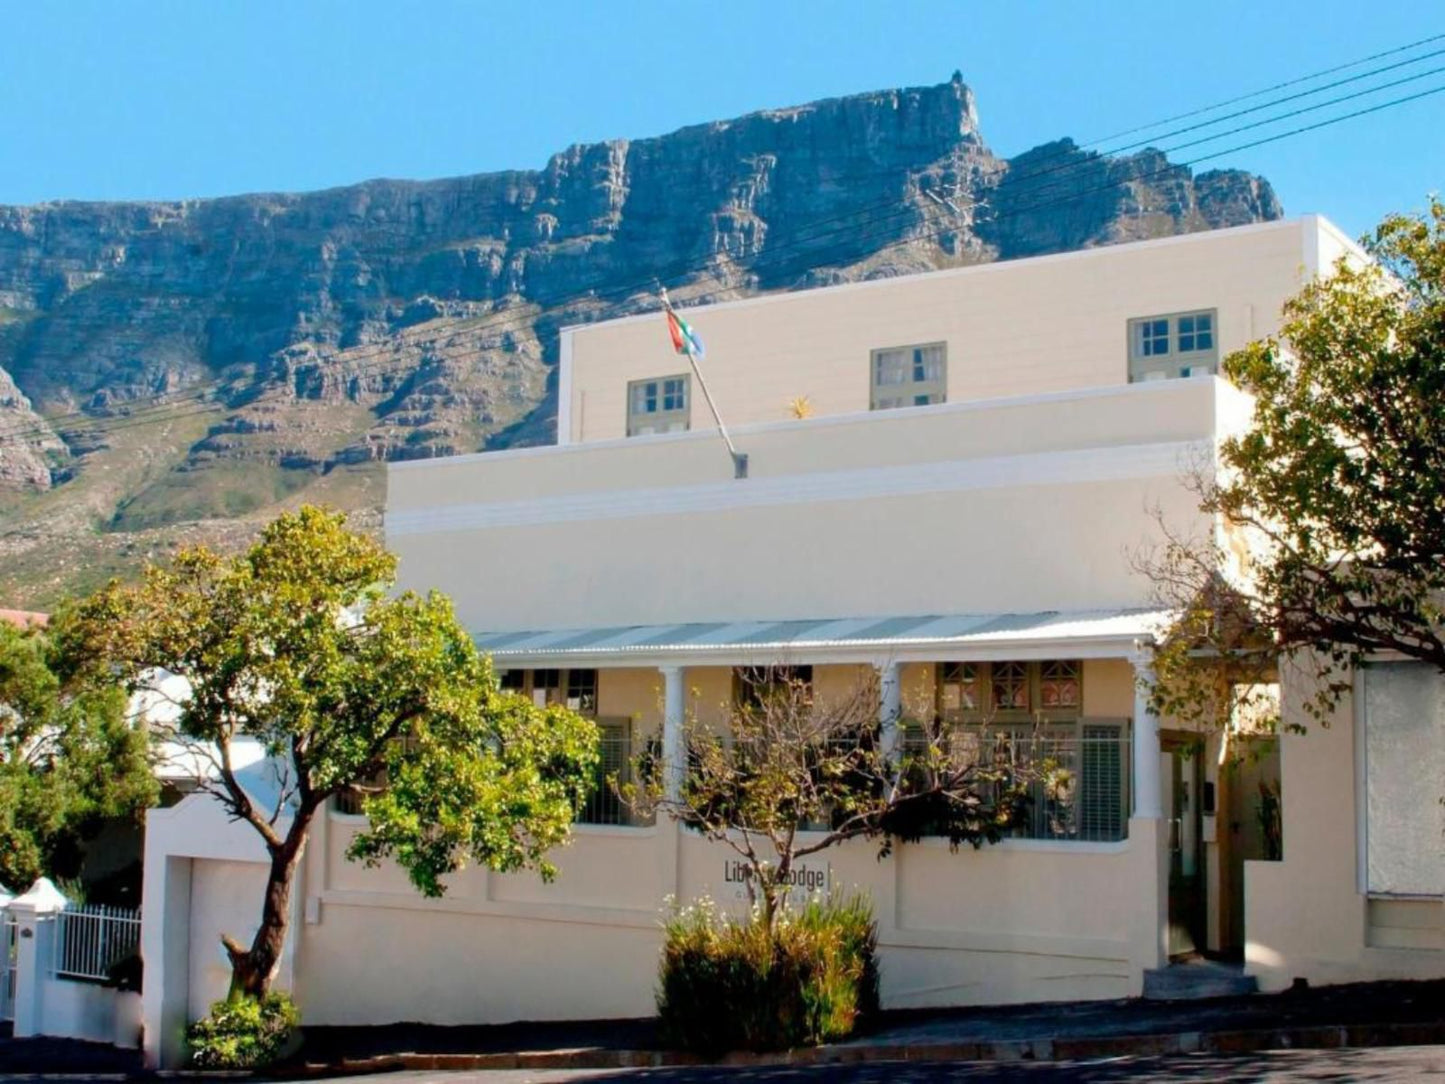 Liberty Lodge Bandb Tamboerskloof Cape Town Western Cape South Africa House, Building, Architecture